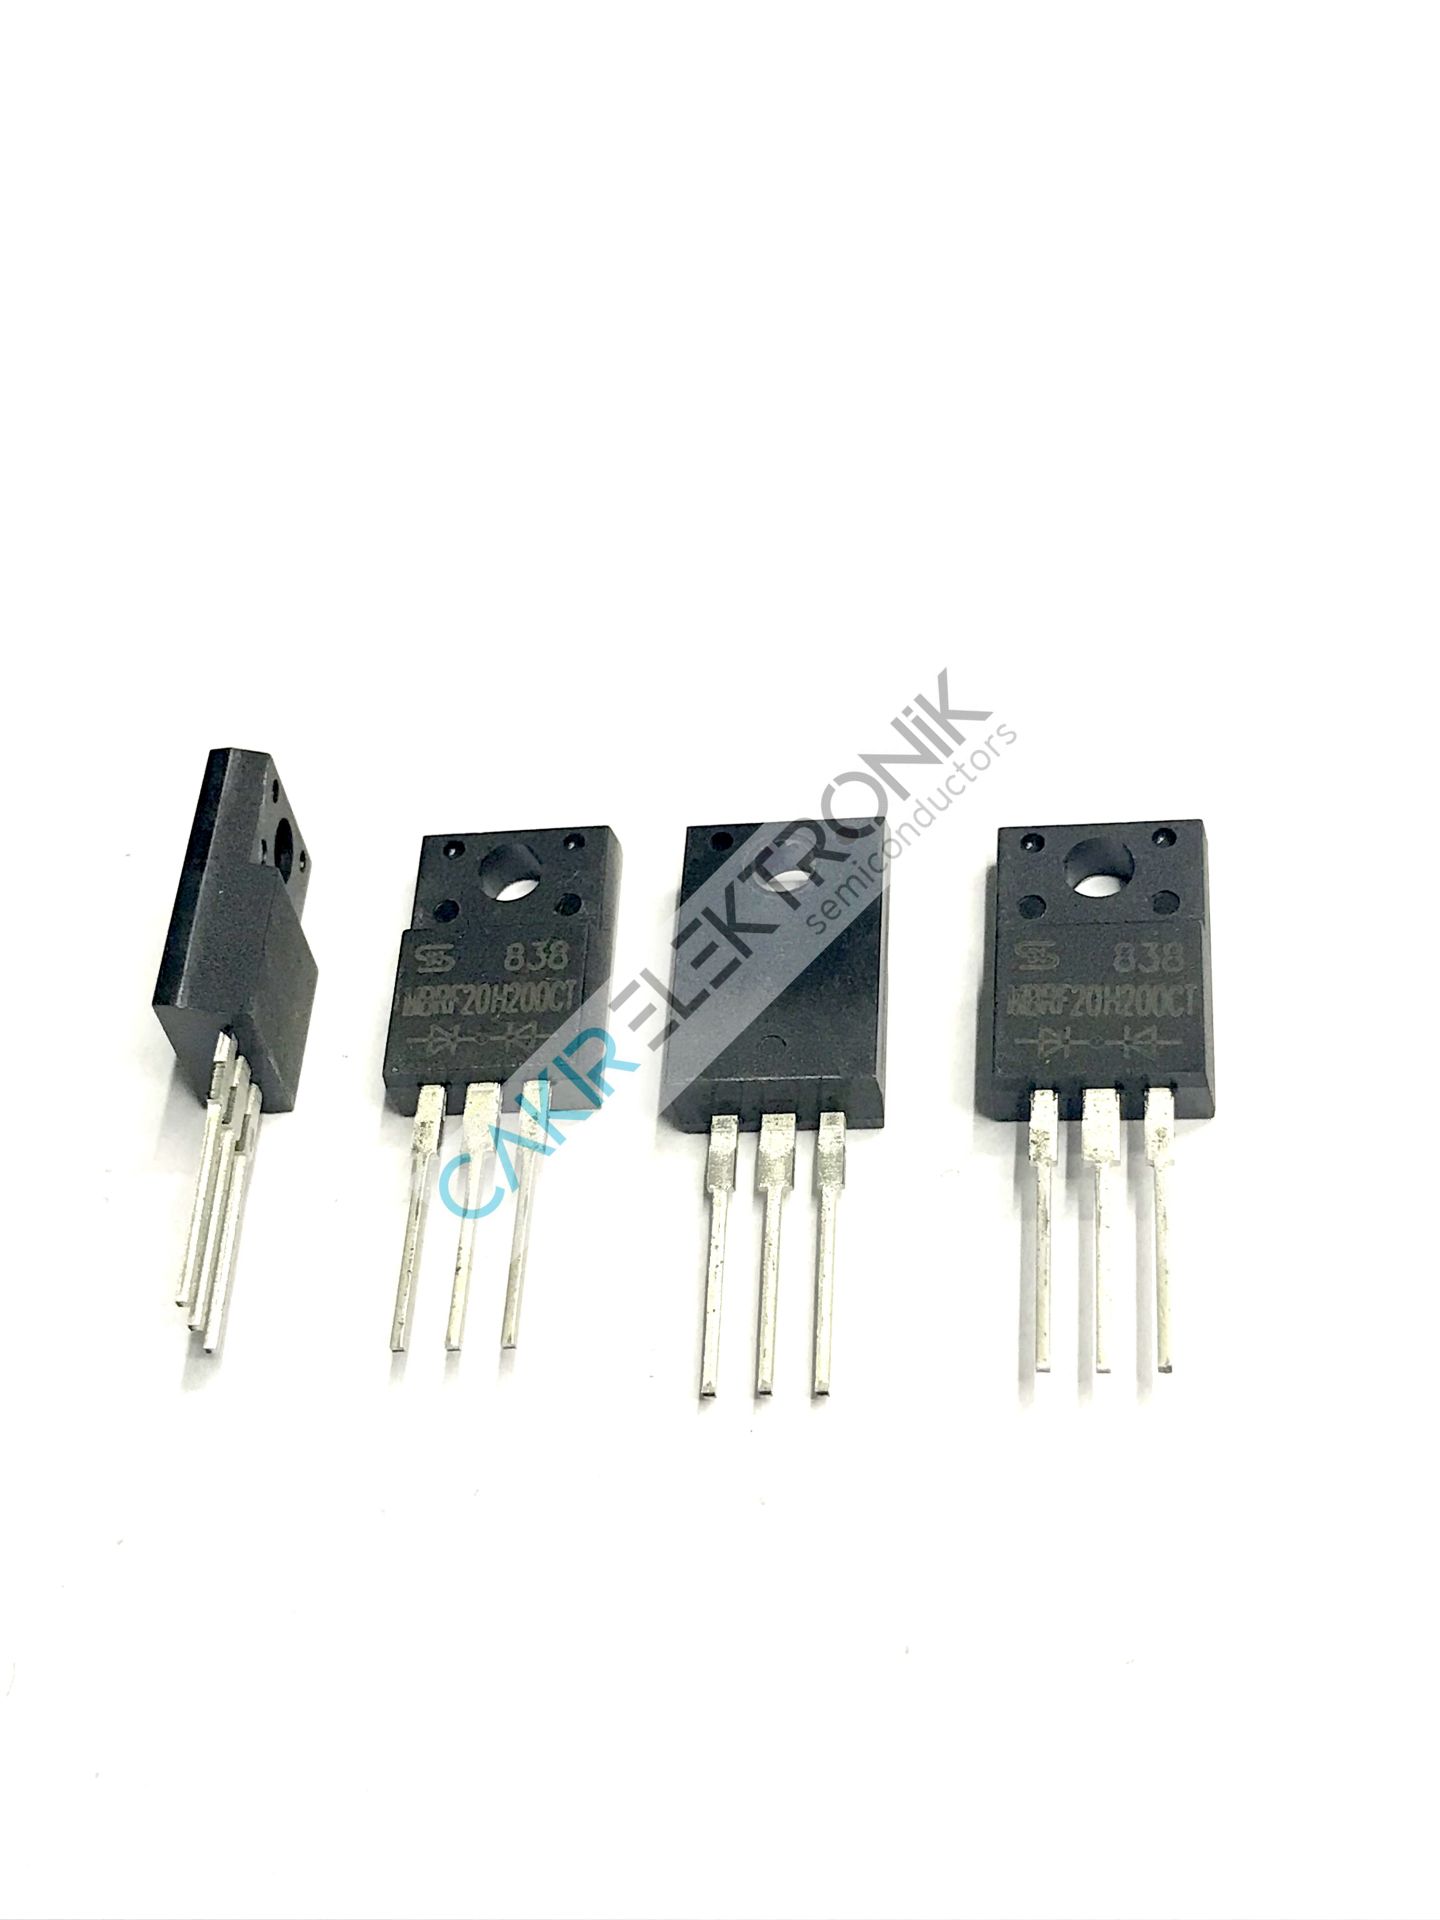 MBRF20H200CT , 20H200CT , 20H200 Dual Schottky Rectifiers